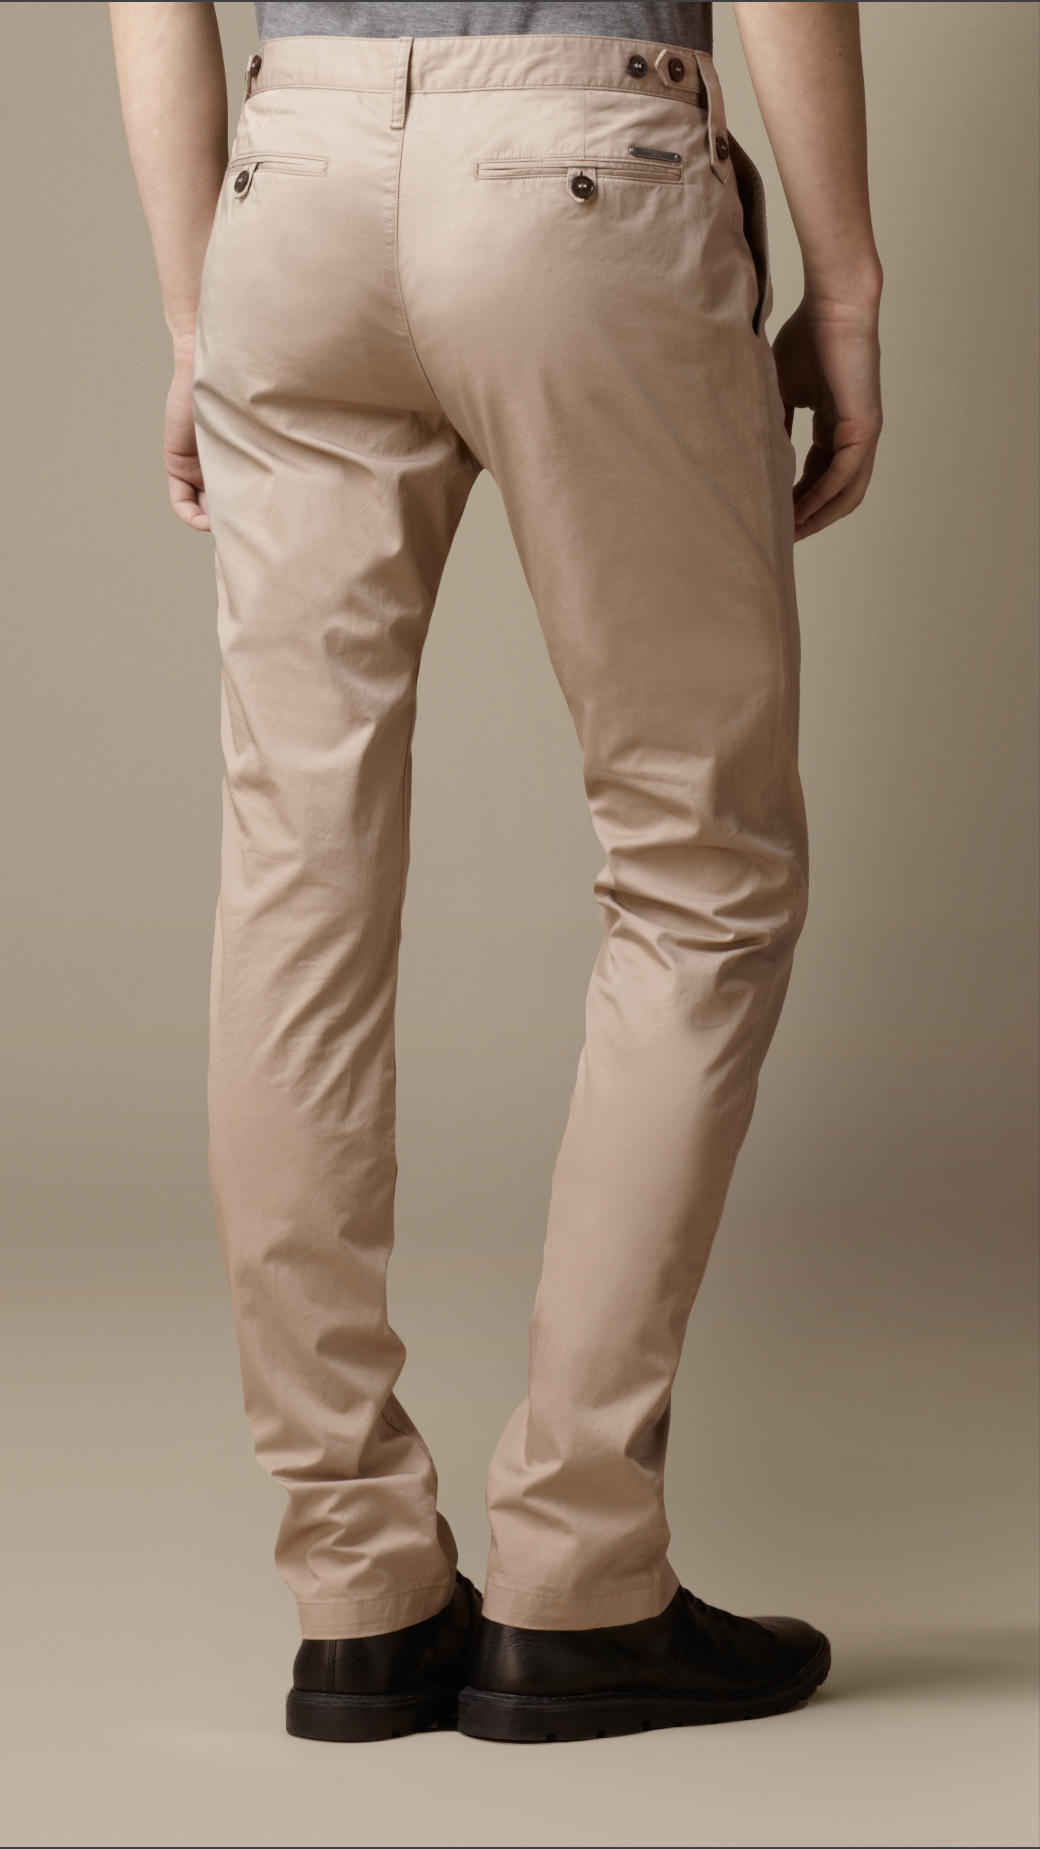 Måne Sprede Arkæologiske Burberry Slim Fit Cotton Chinos in Taupe (Natural) for Men - Lyst